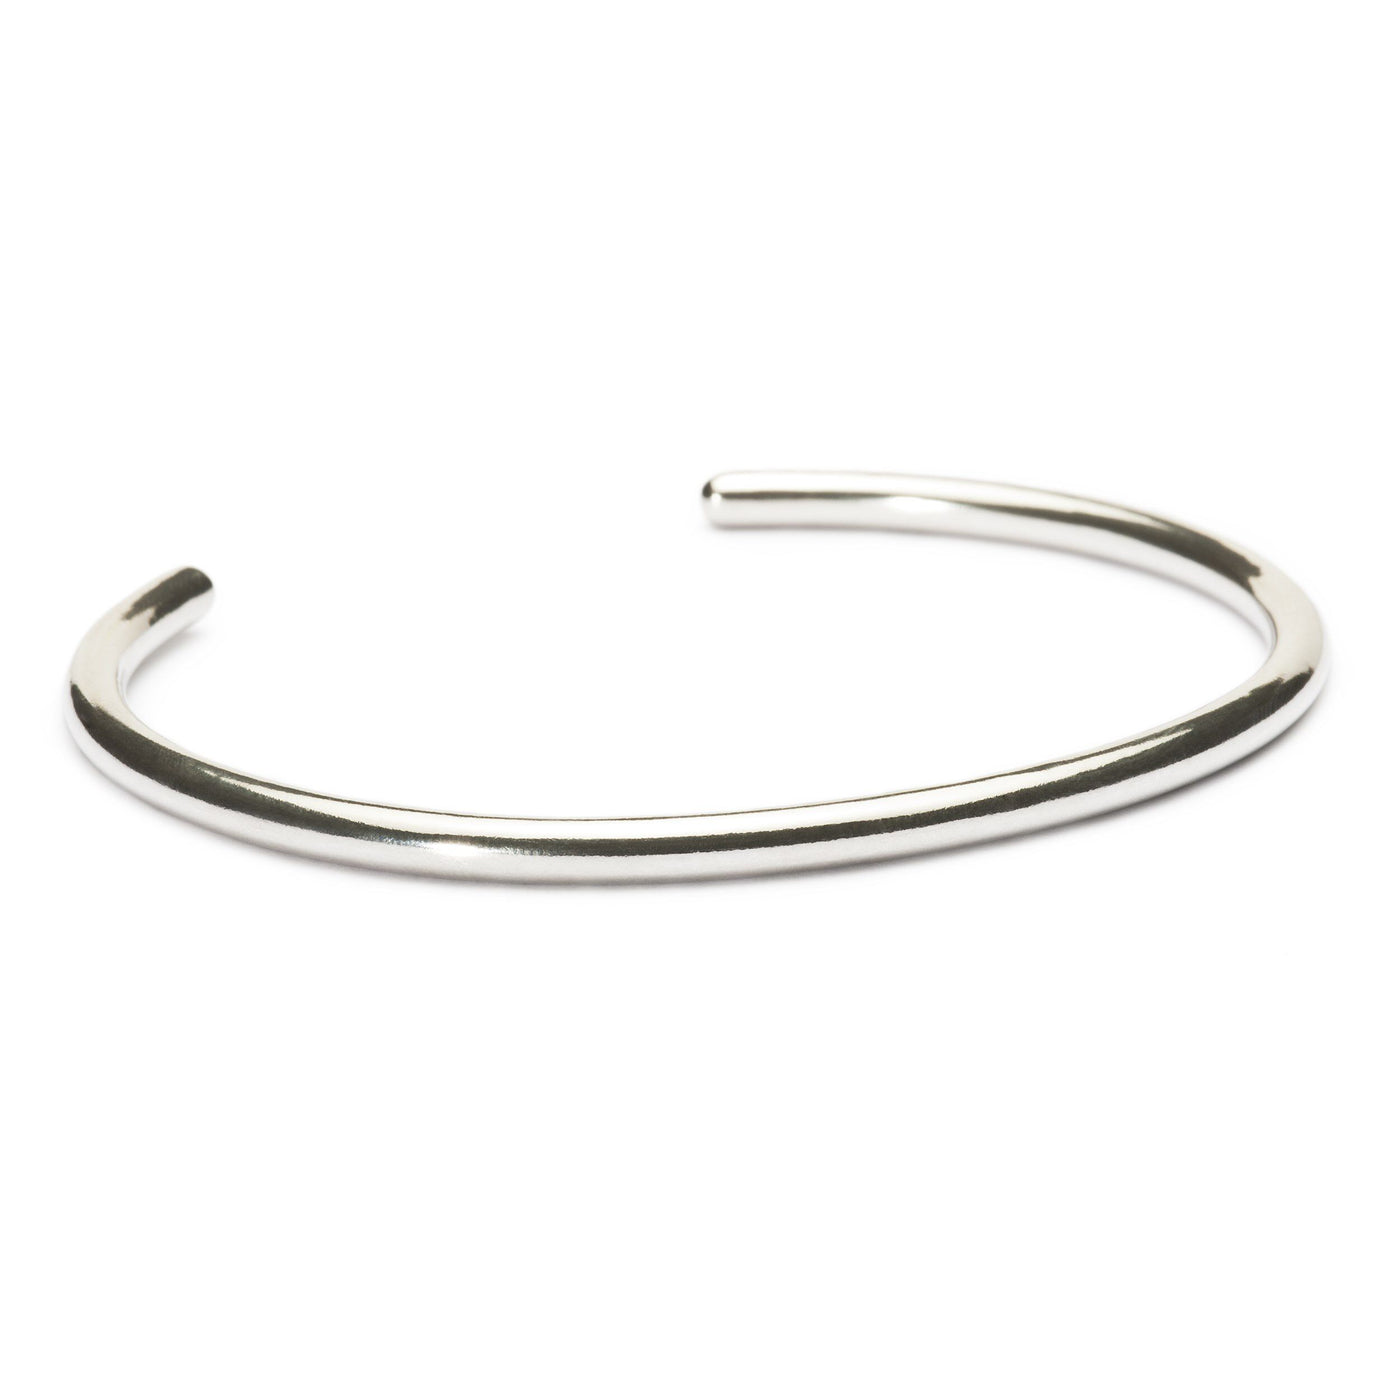 Sterling Silver Bangle with 2 x Oxidized Spacers - Trollbeads Canada